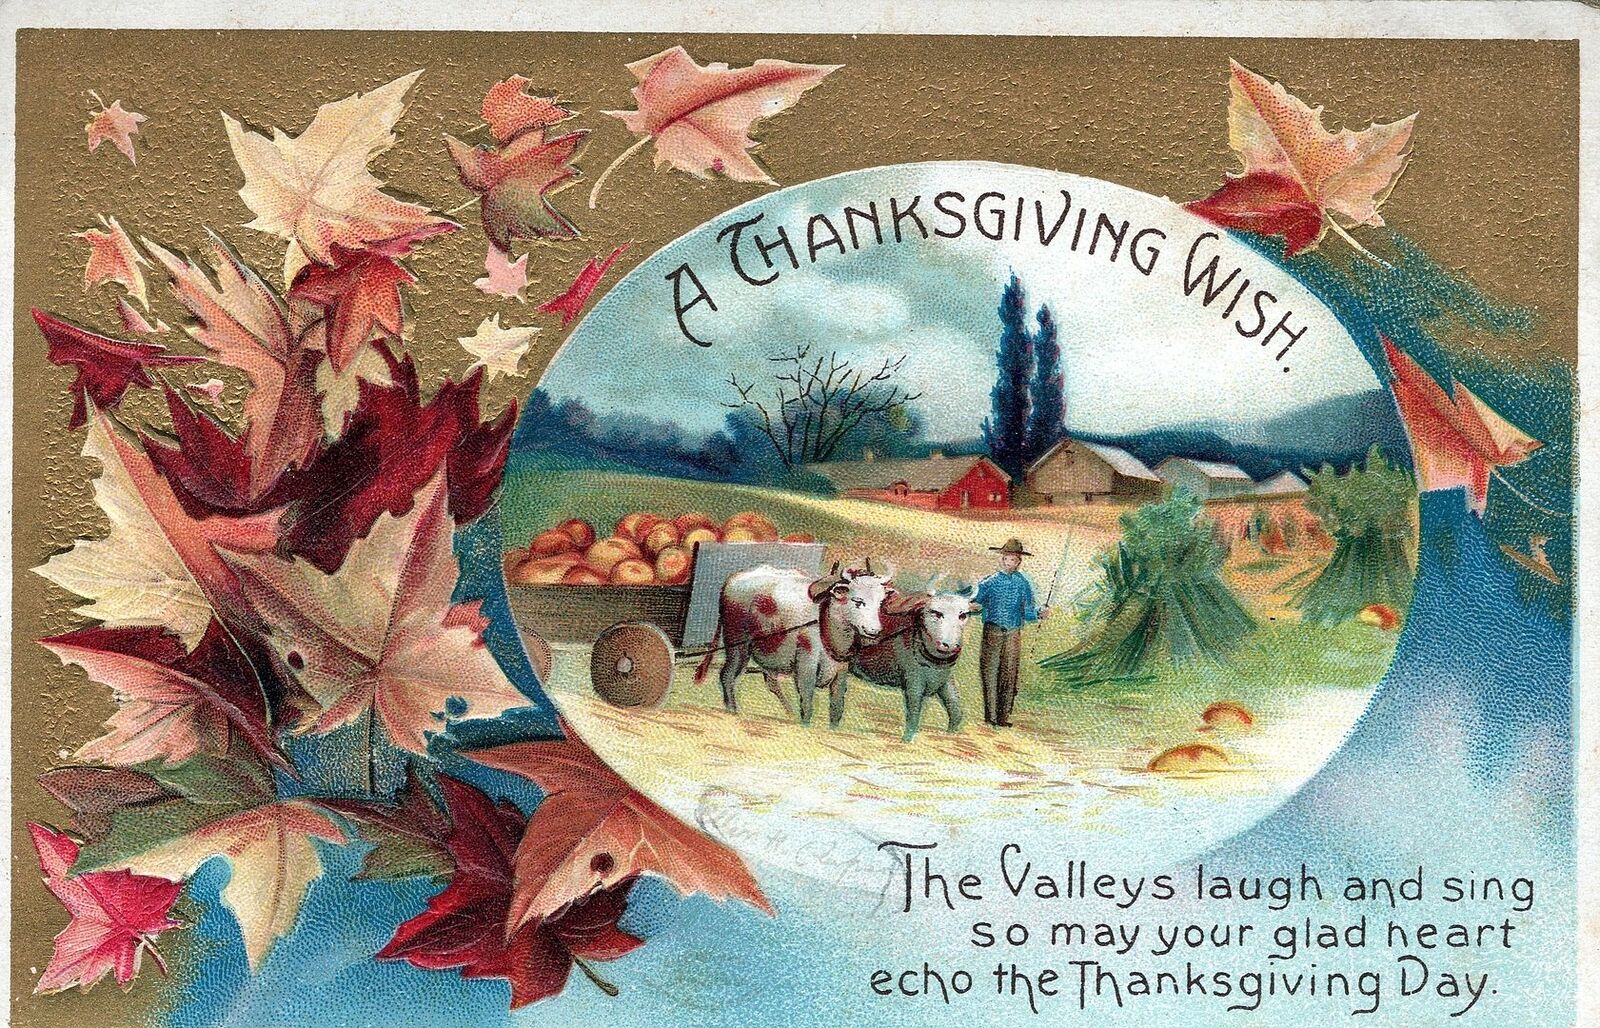 THANKSGIVING - The Valleys Laugh And Sing A Thanksgiving Wish Postcard